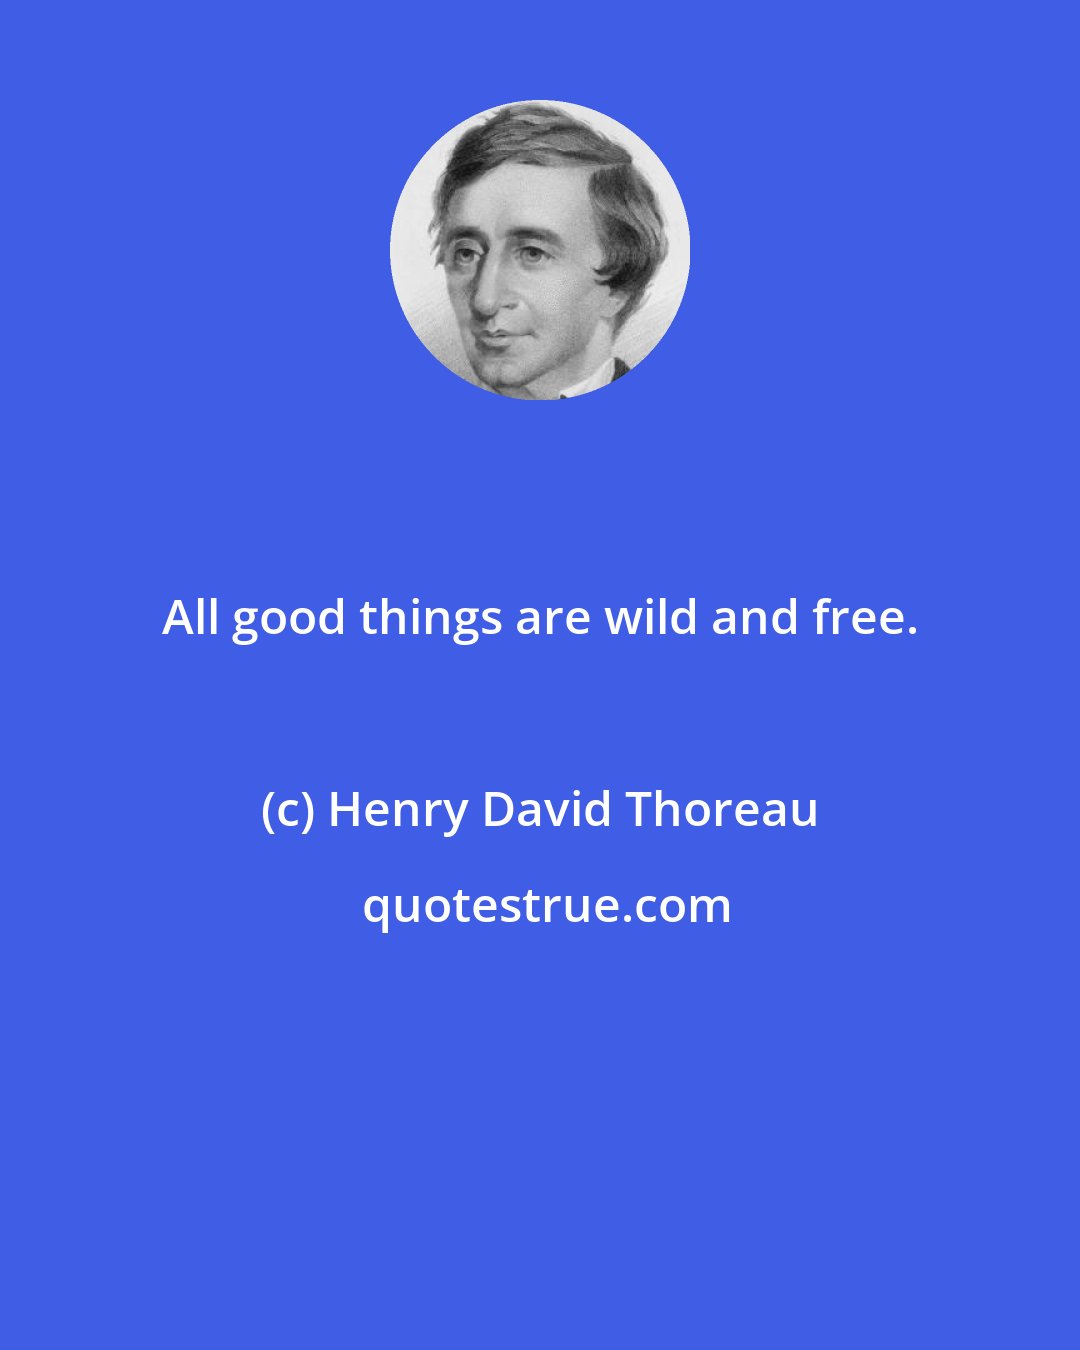 Henry David Thoreau: All good things are wild and free.